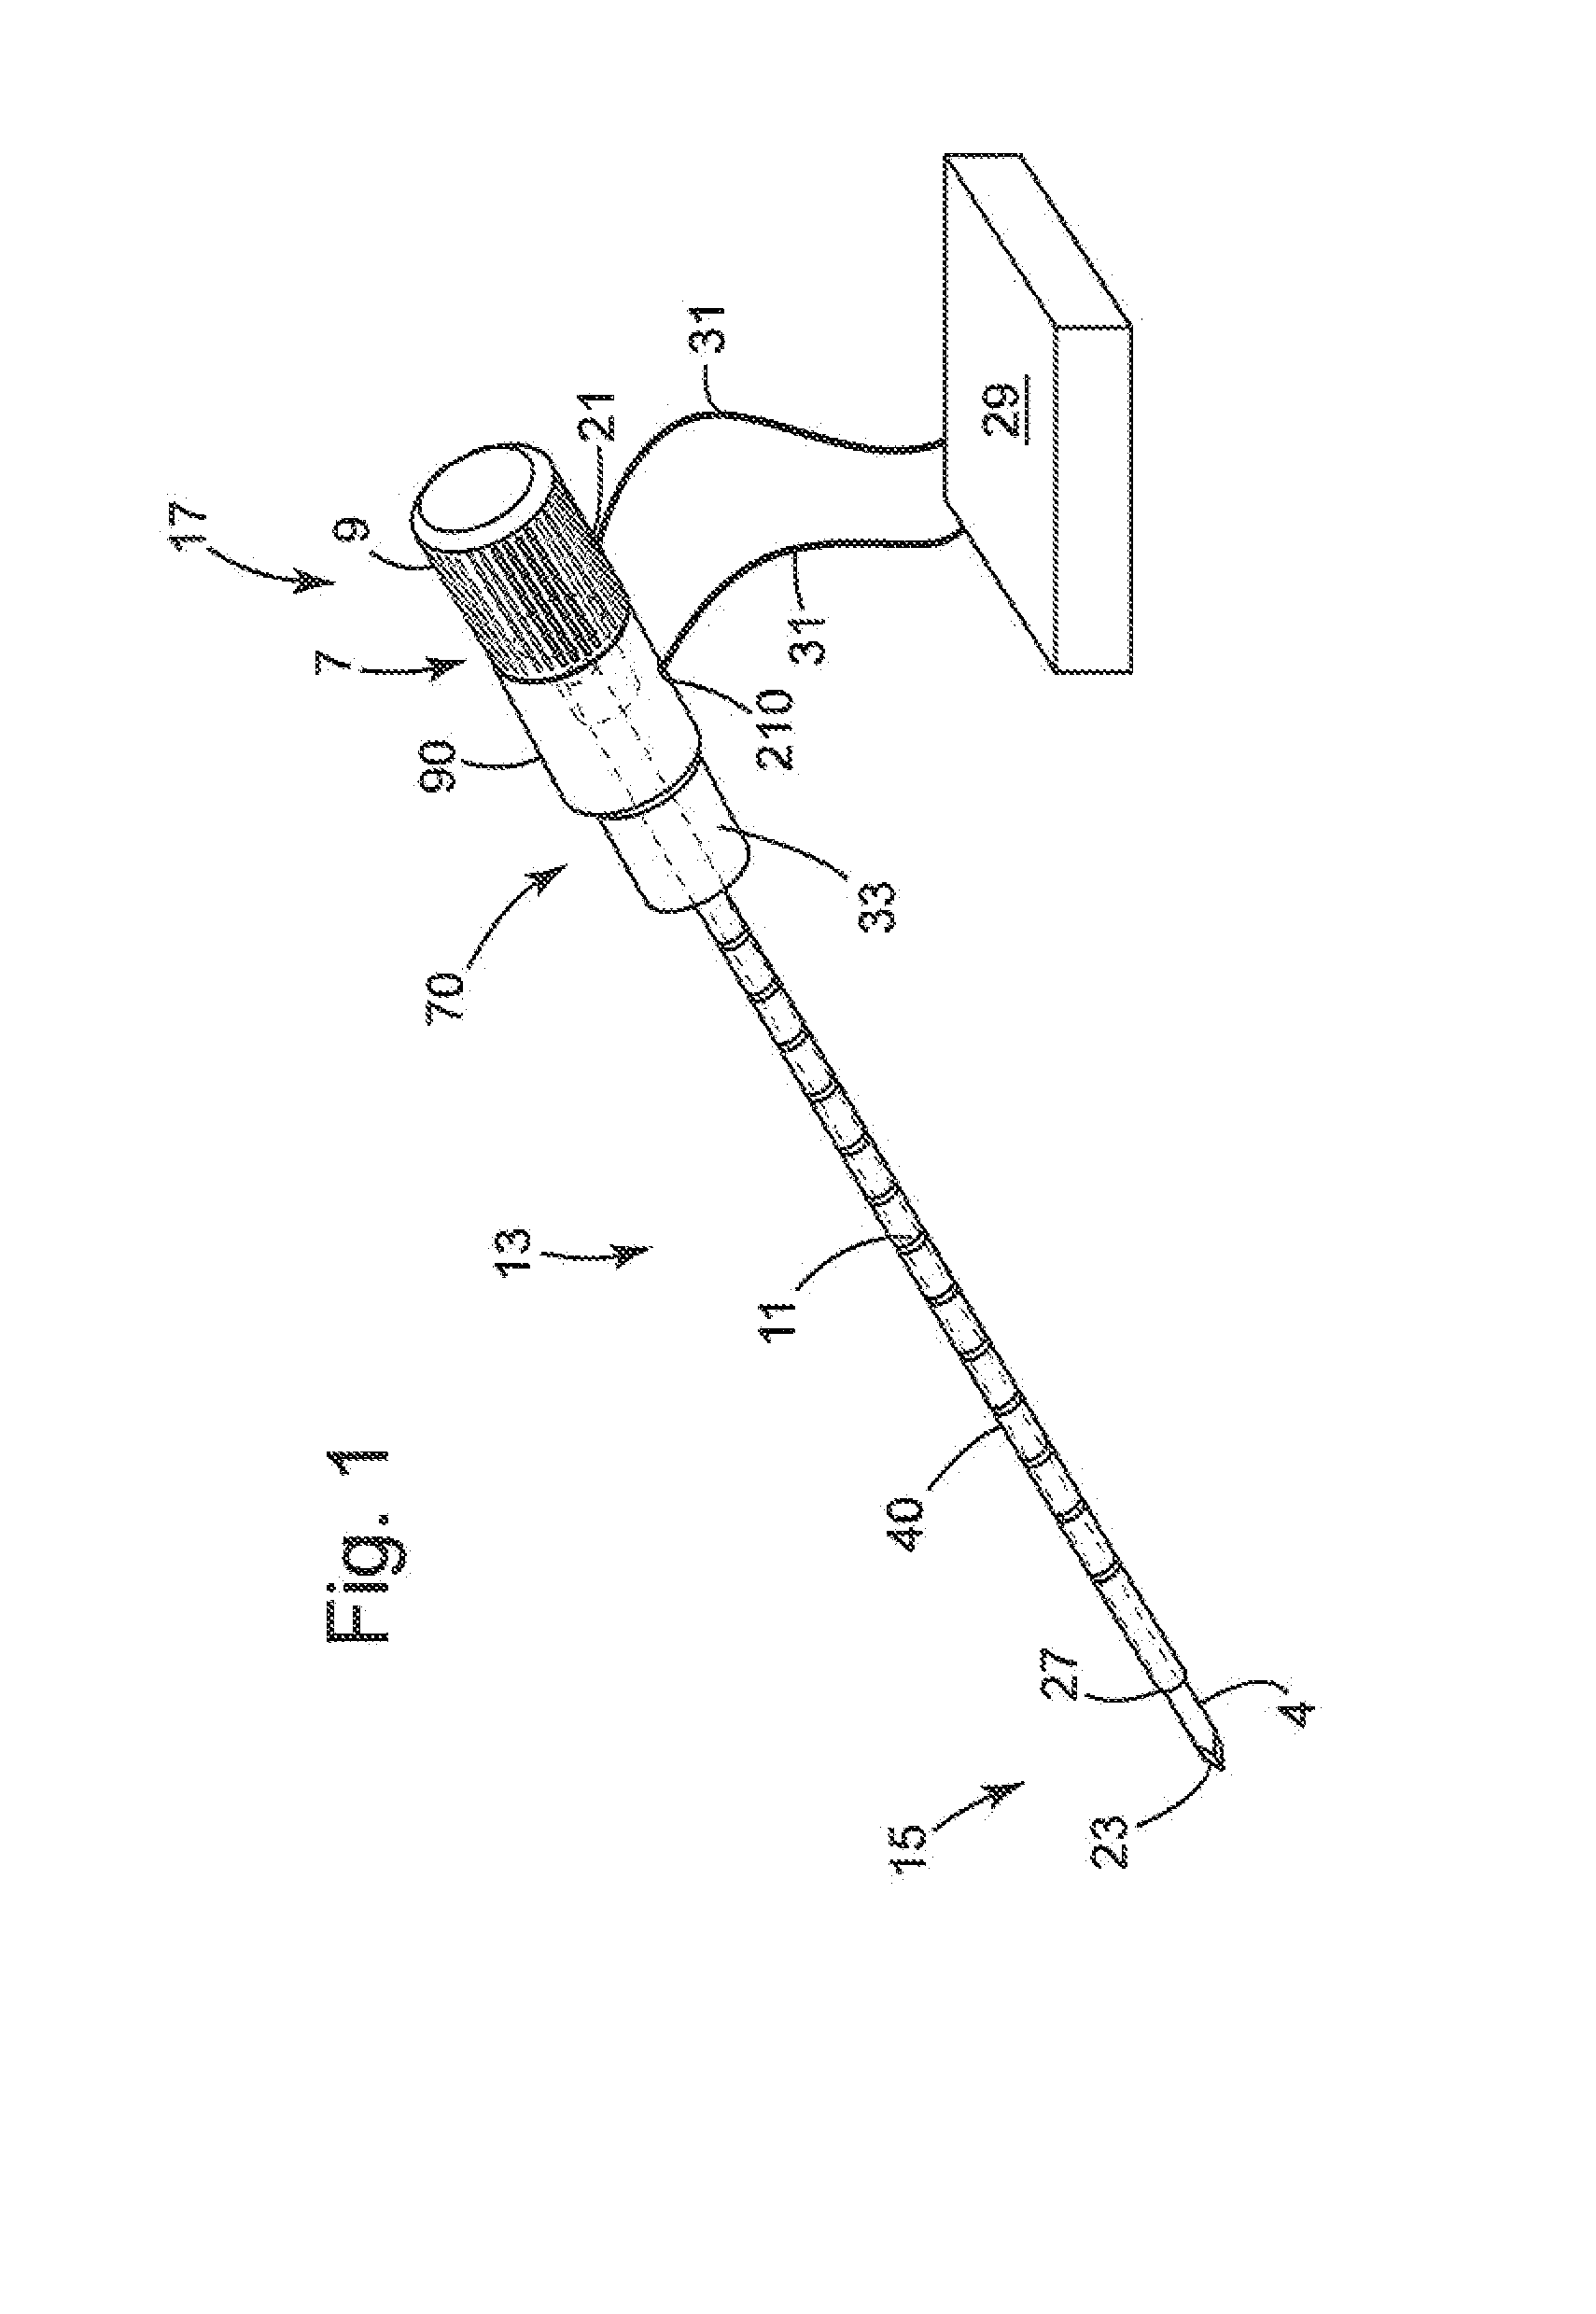 Coaxial dual function probe and method of use